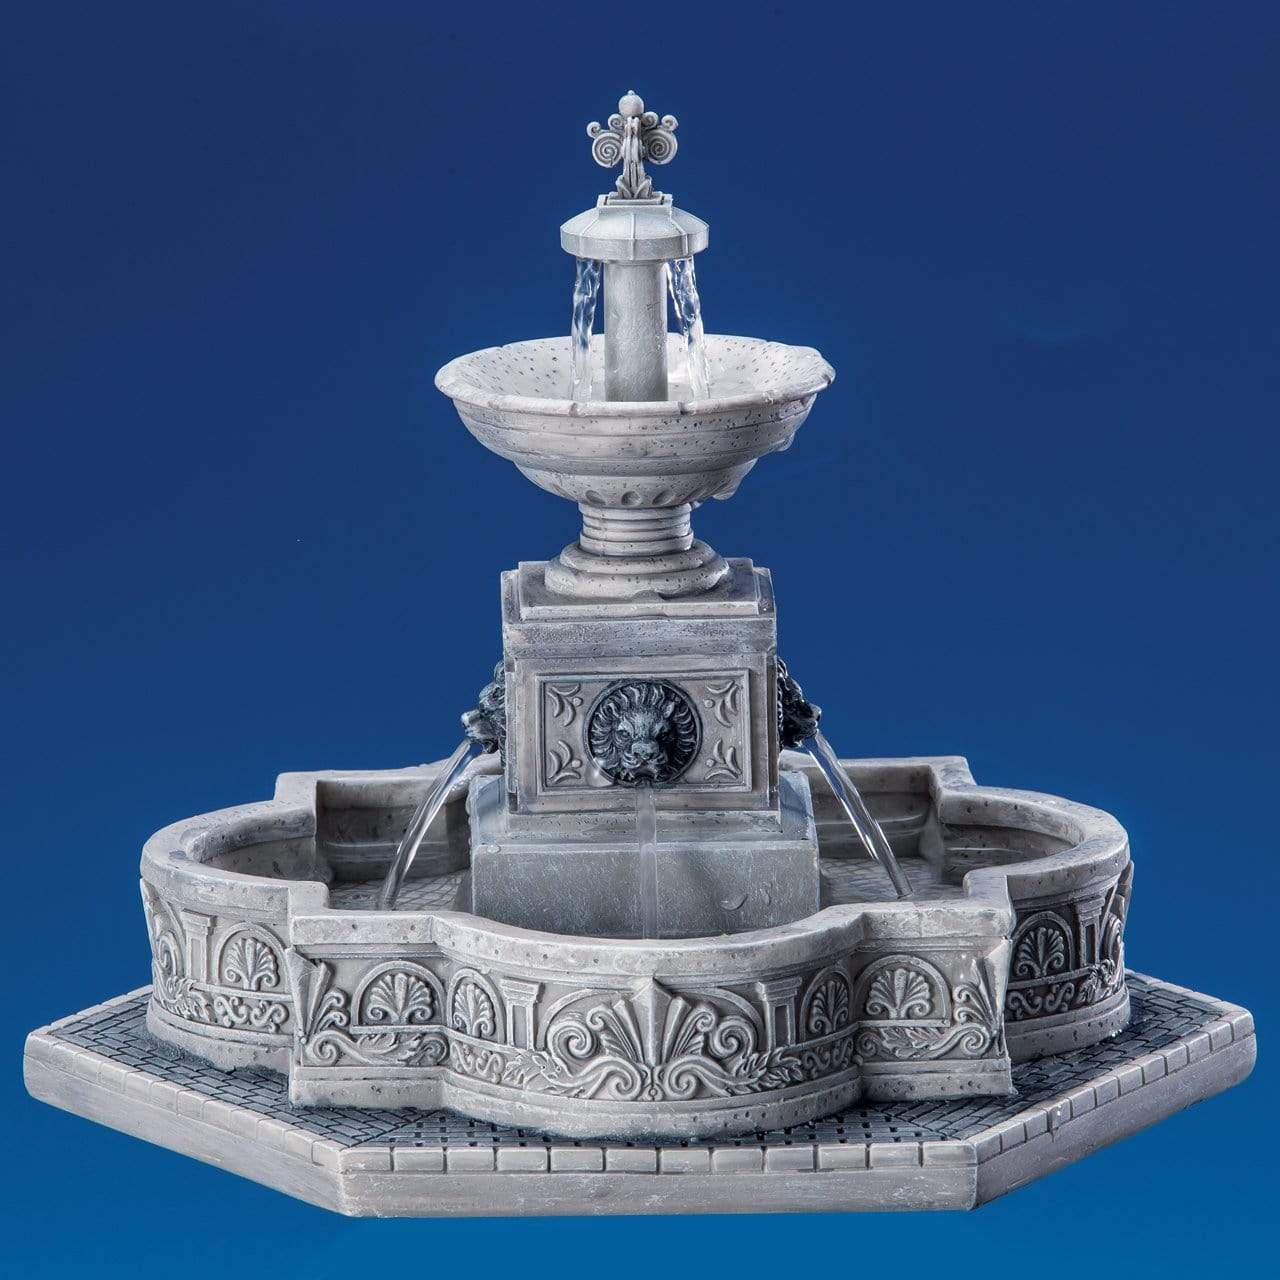 Lemax Table Accent Lemax Modular Plaza-Fountain, With 4.5V Adaptor